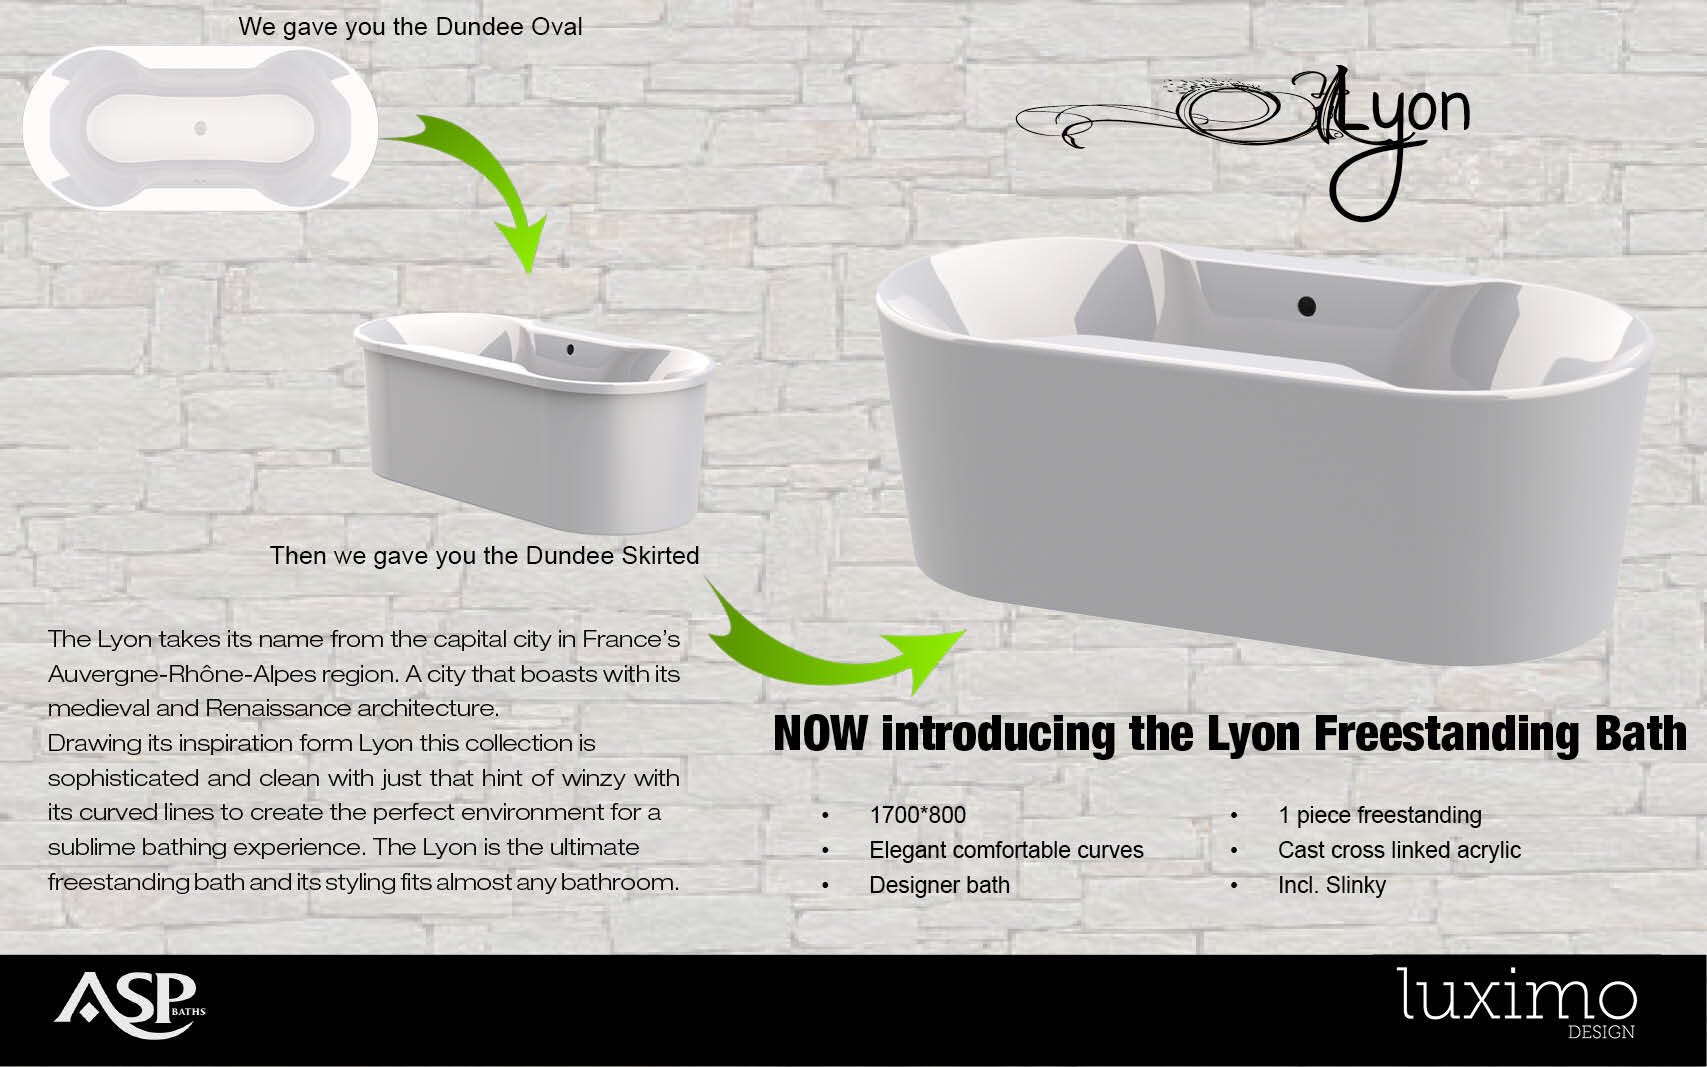 Luximo Design We Are Pleased To Announce The Launch Of Our New Bath Lyon One Piece Free Standing Bath With Its Beautiful Curves And Sophisticated Design It S The Only Bath You